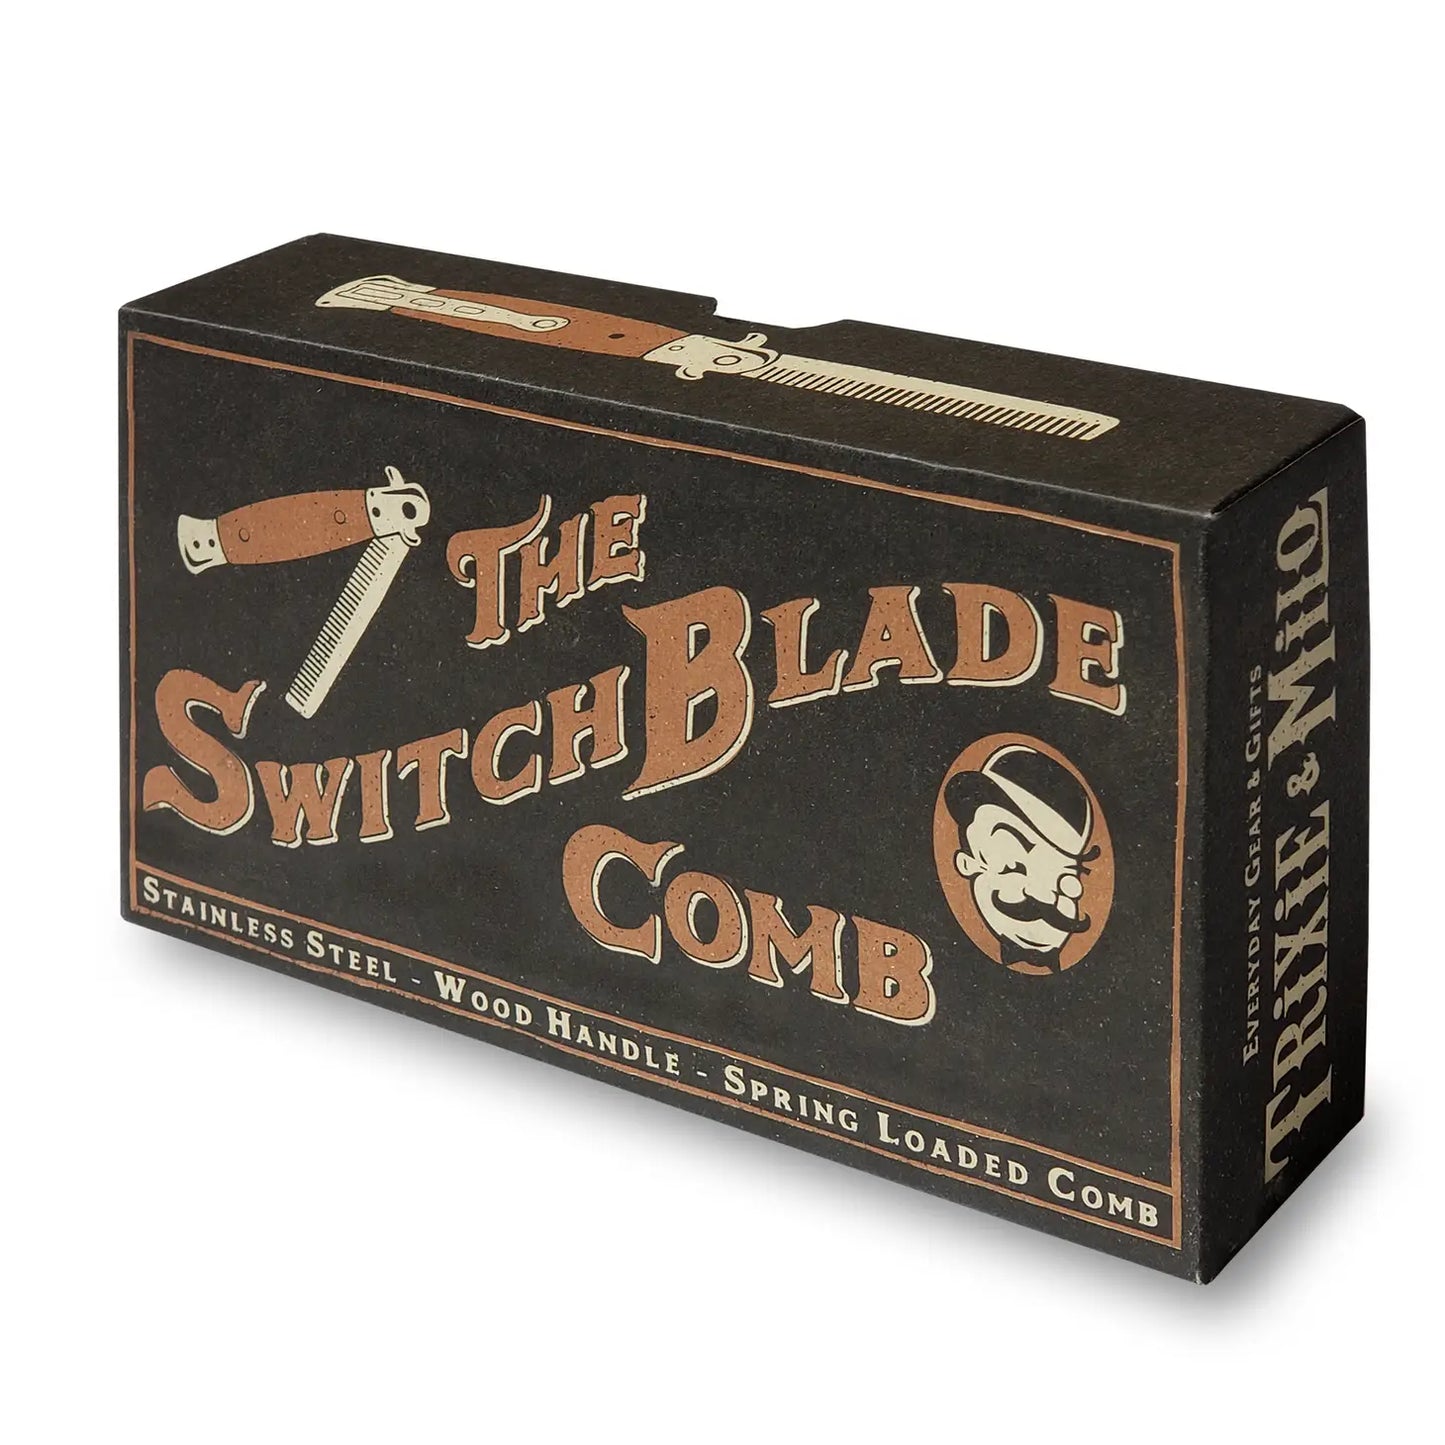 The SwitchBlade Comb